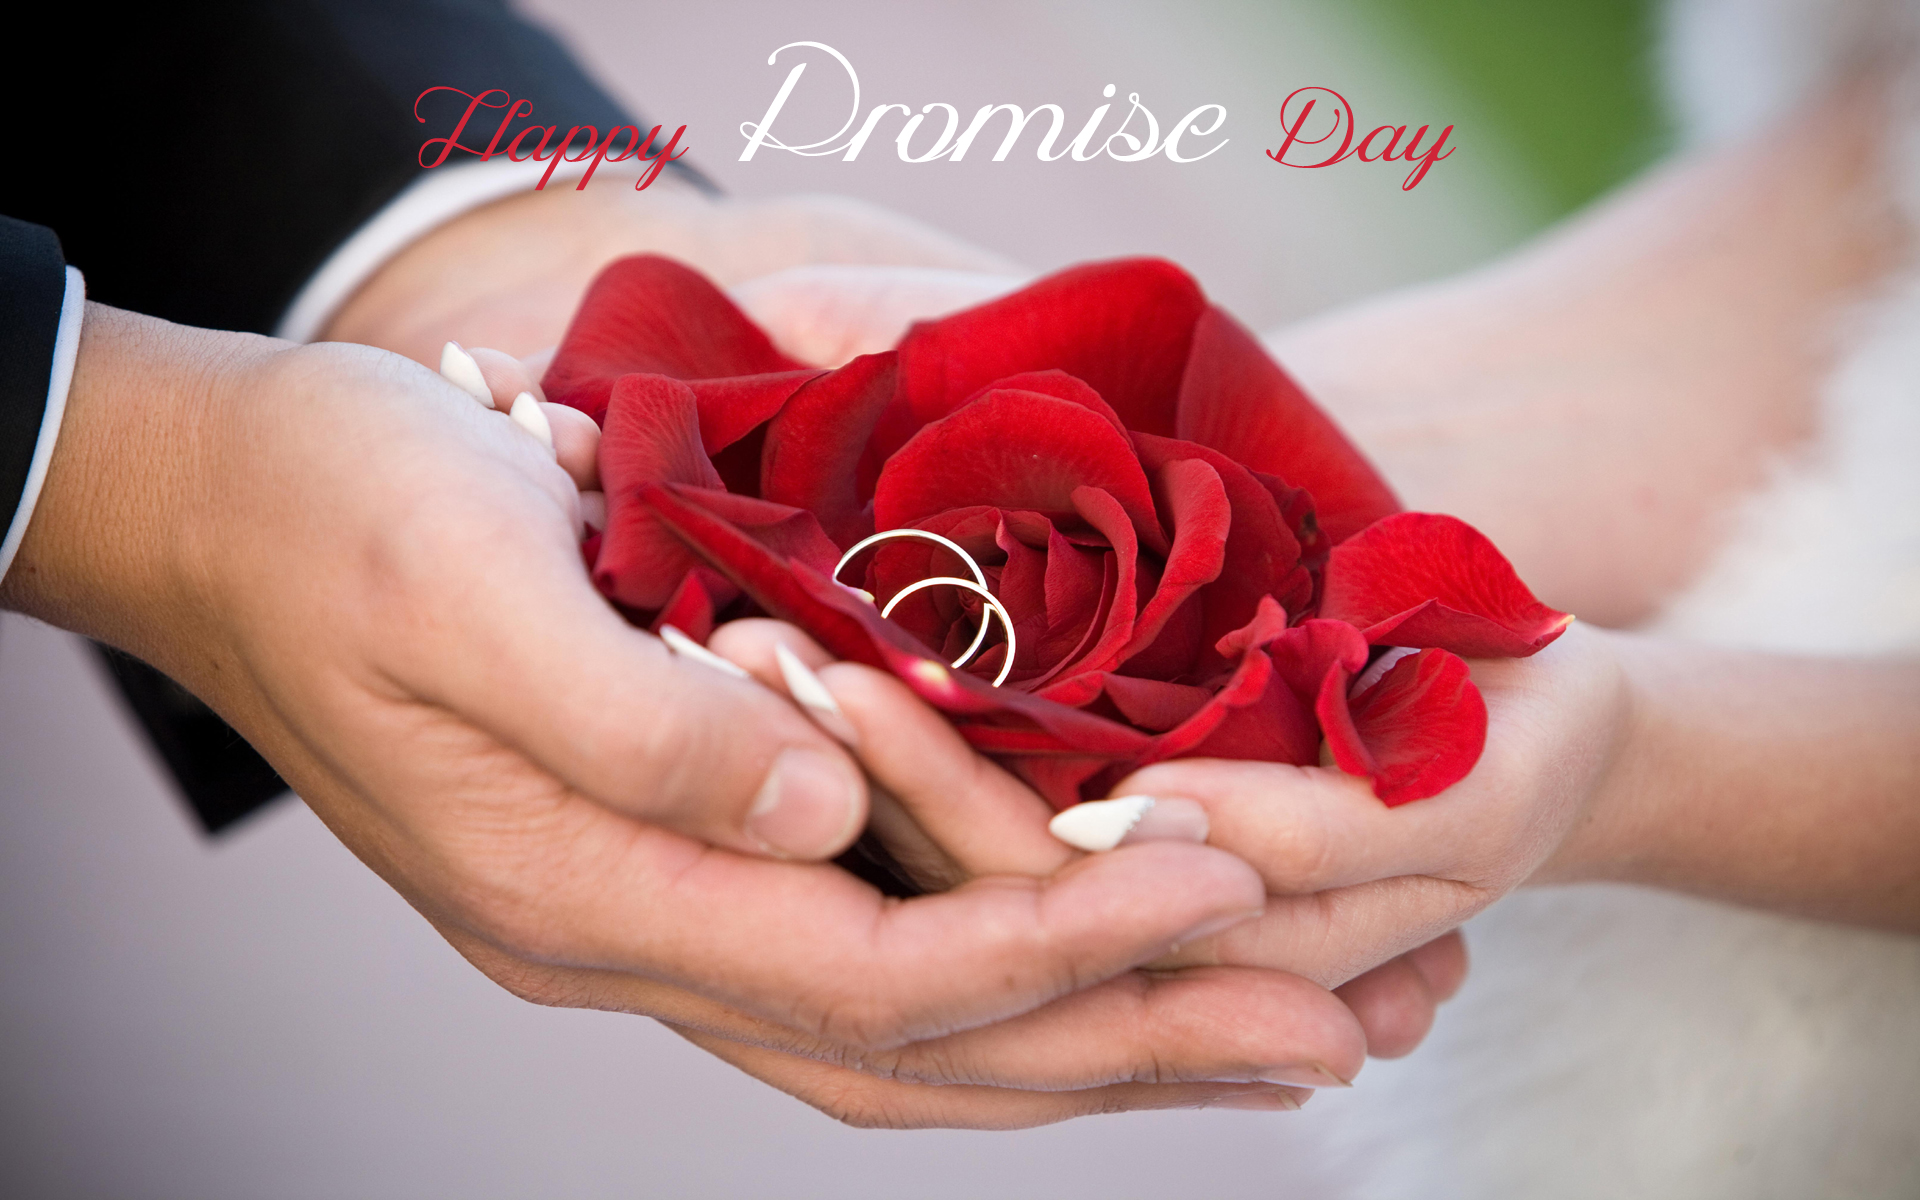 Happy Promise Day - Gifts & Best HD Wallpapers for Promise Day